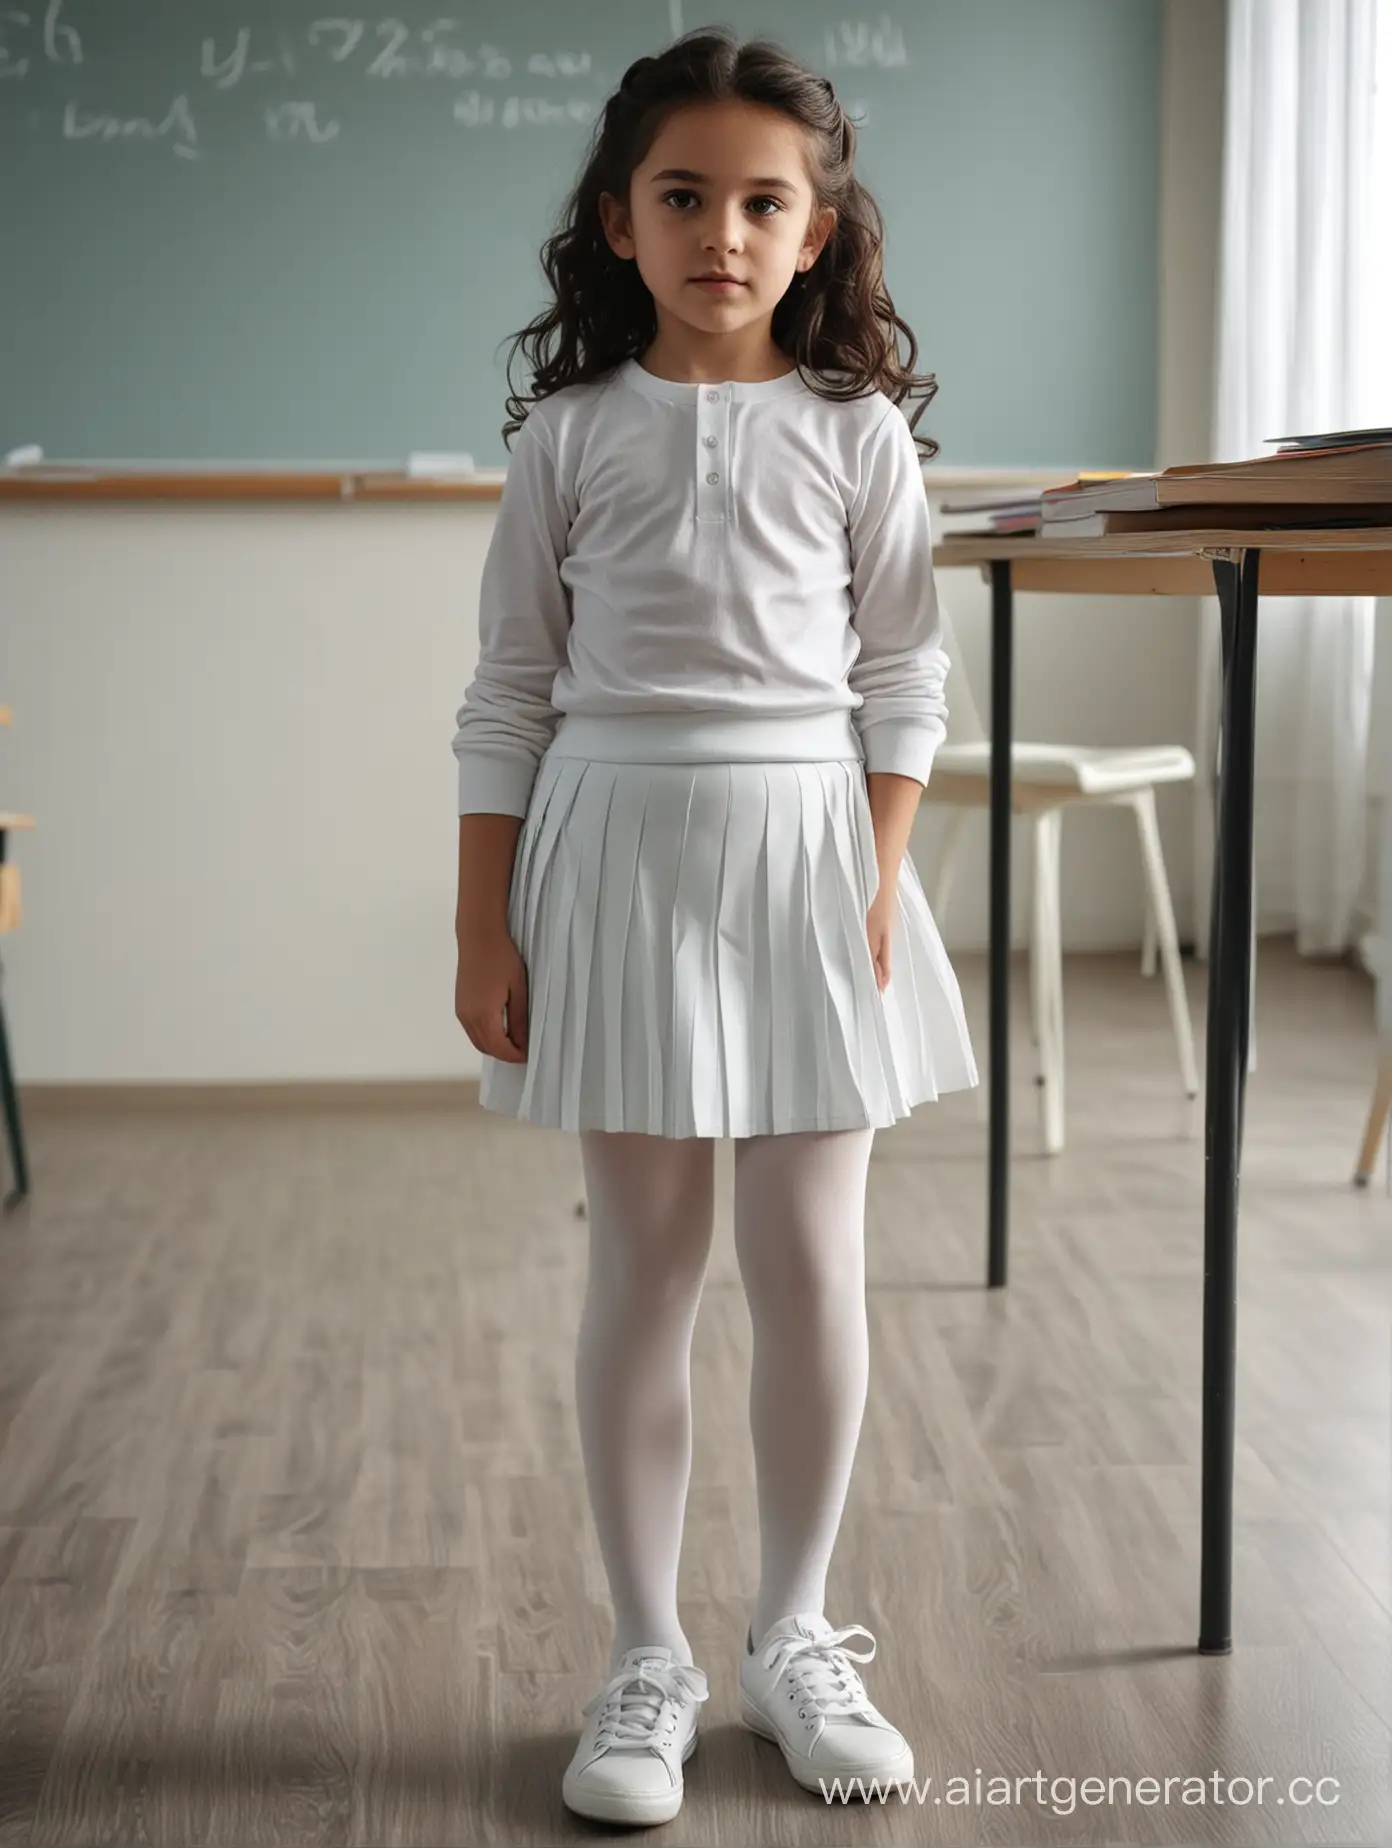 Turkish-Schoolgirl-in-Pleated-Skirt-and-Sport-Shoes-in-Classroom